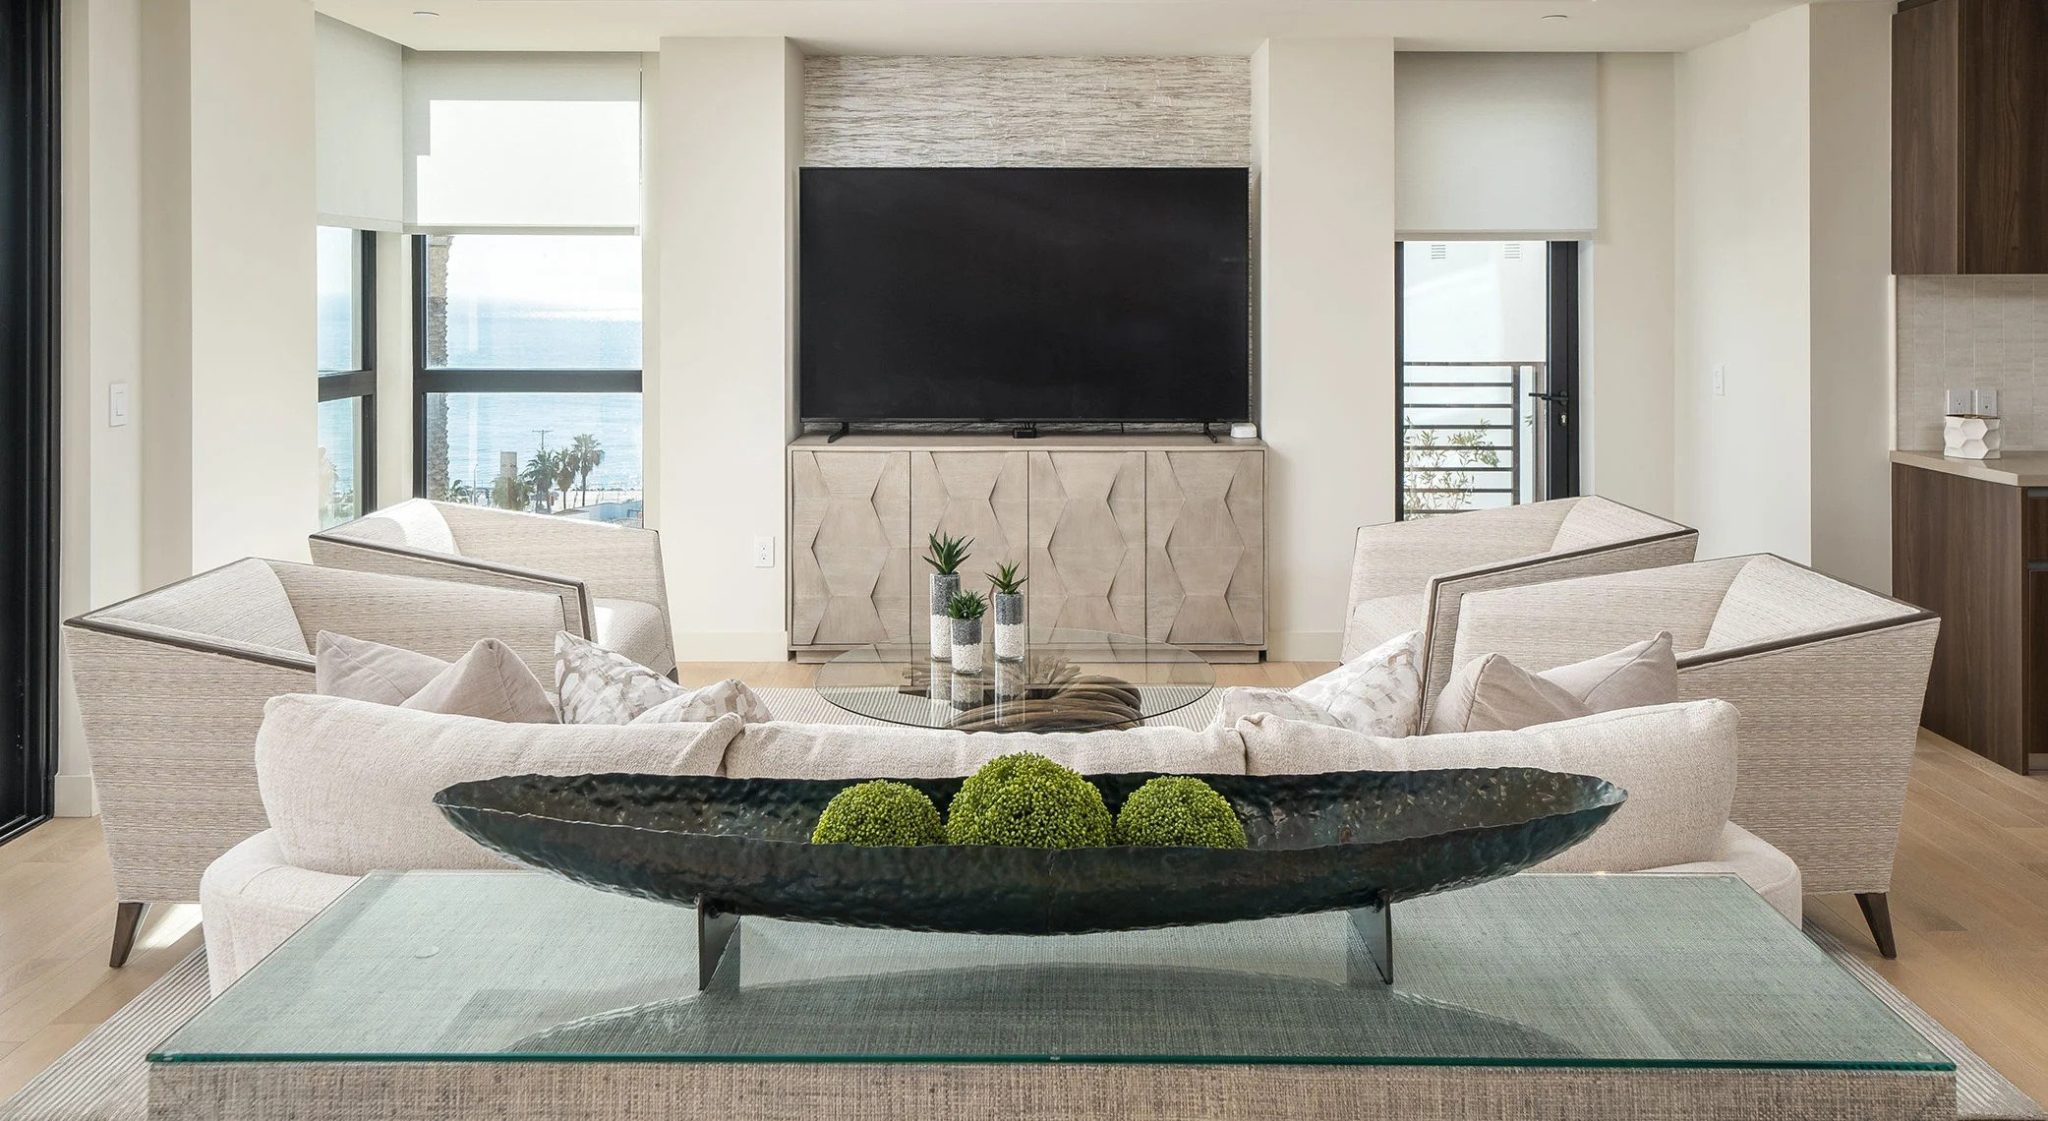 TV Wall Ideas That Steal the Show